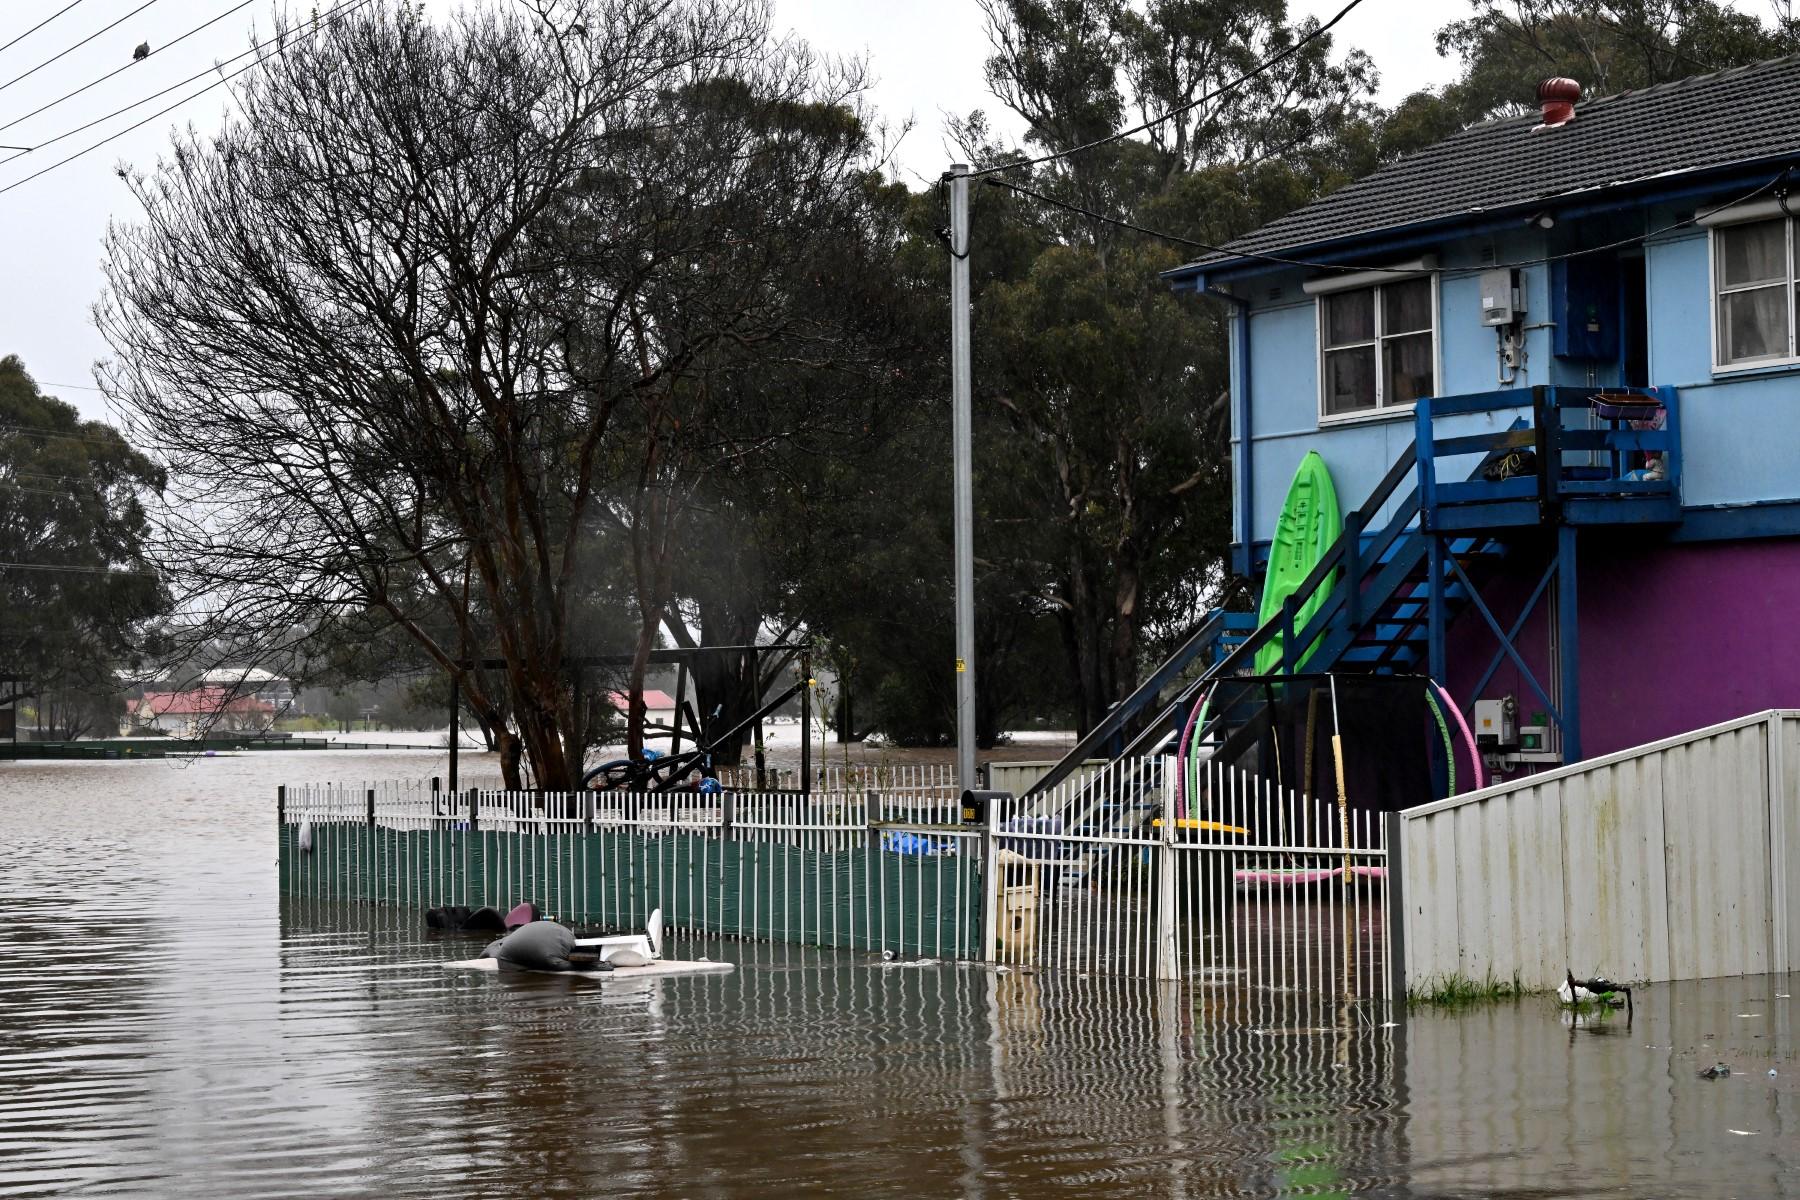 A general view shows a flooded residential area from the overflowing Hawkesbury river due to torrential rain in the Windsor suburb of Sydney on July 4. Photo: AFP